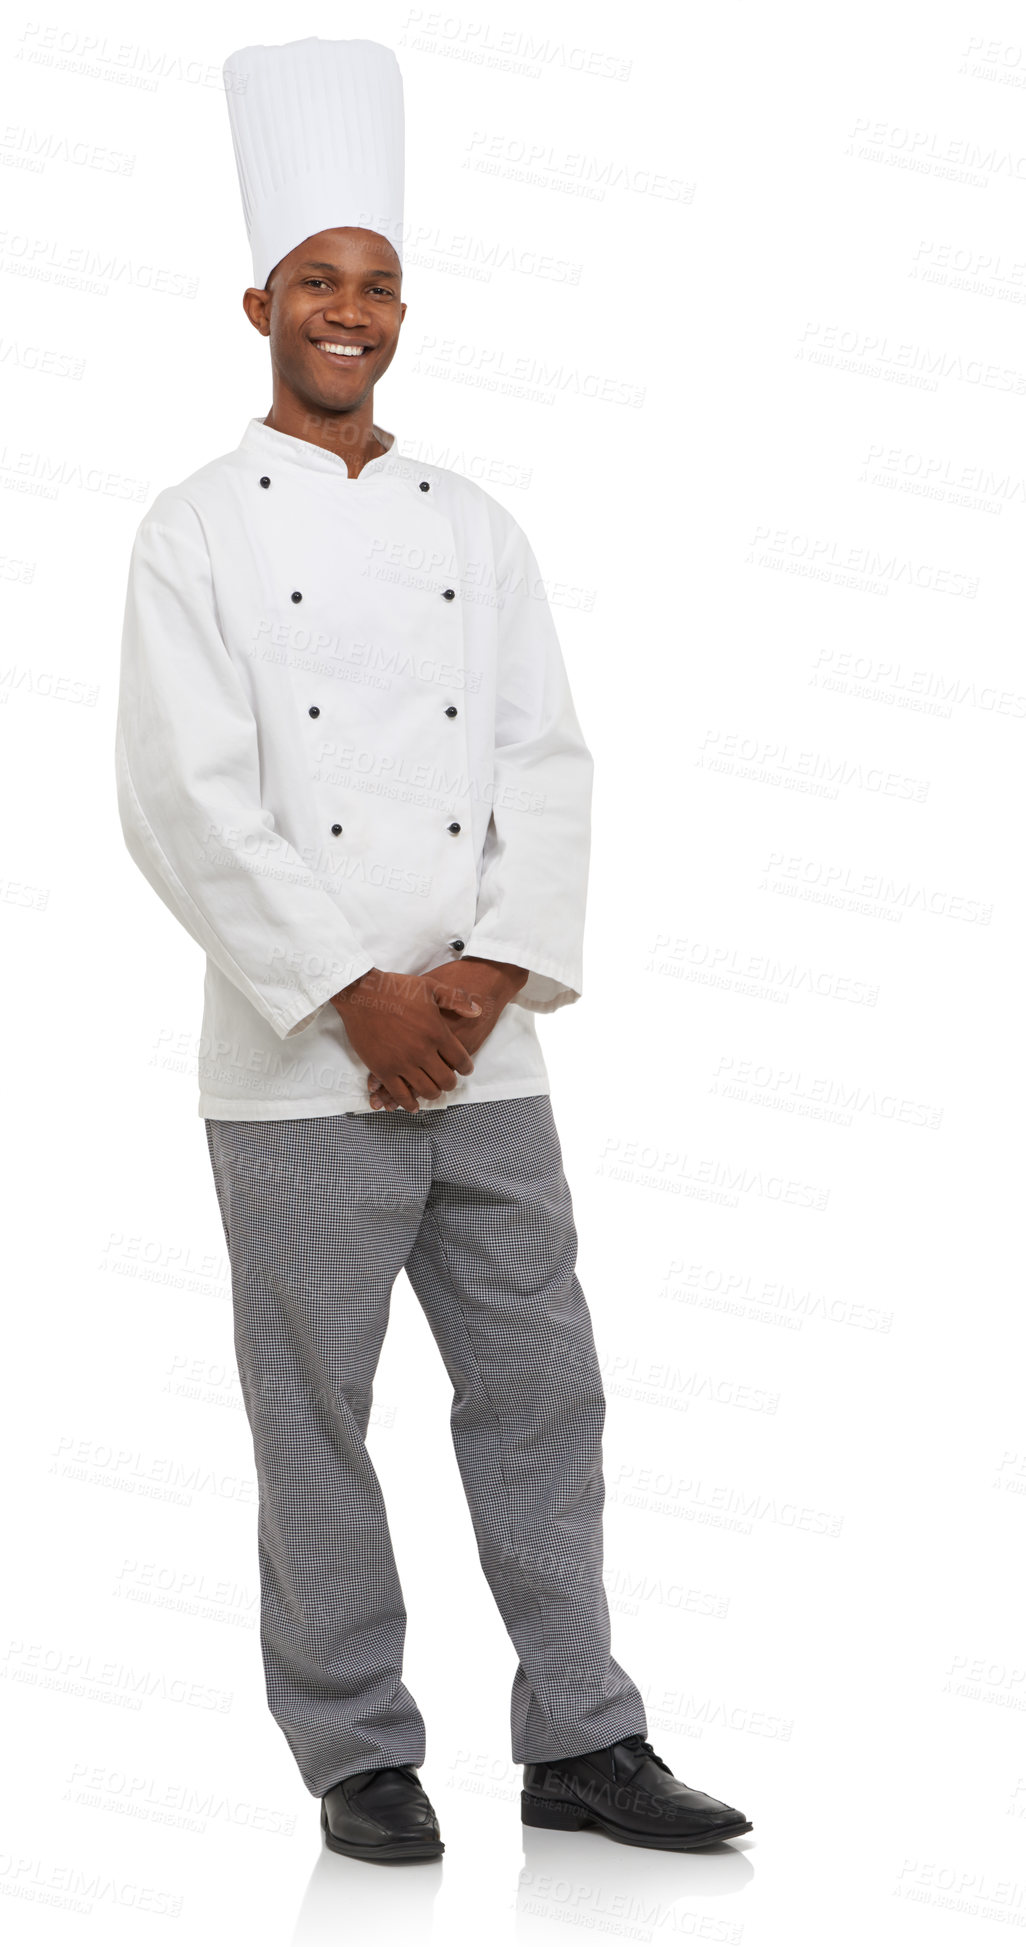 Buy stock photo Studio shot of a young chef isolated on white